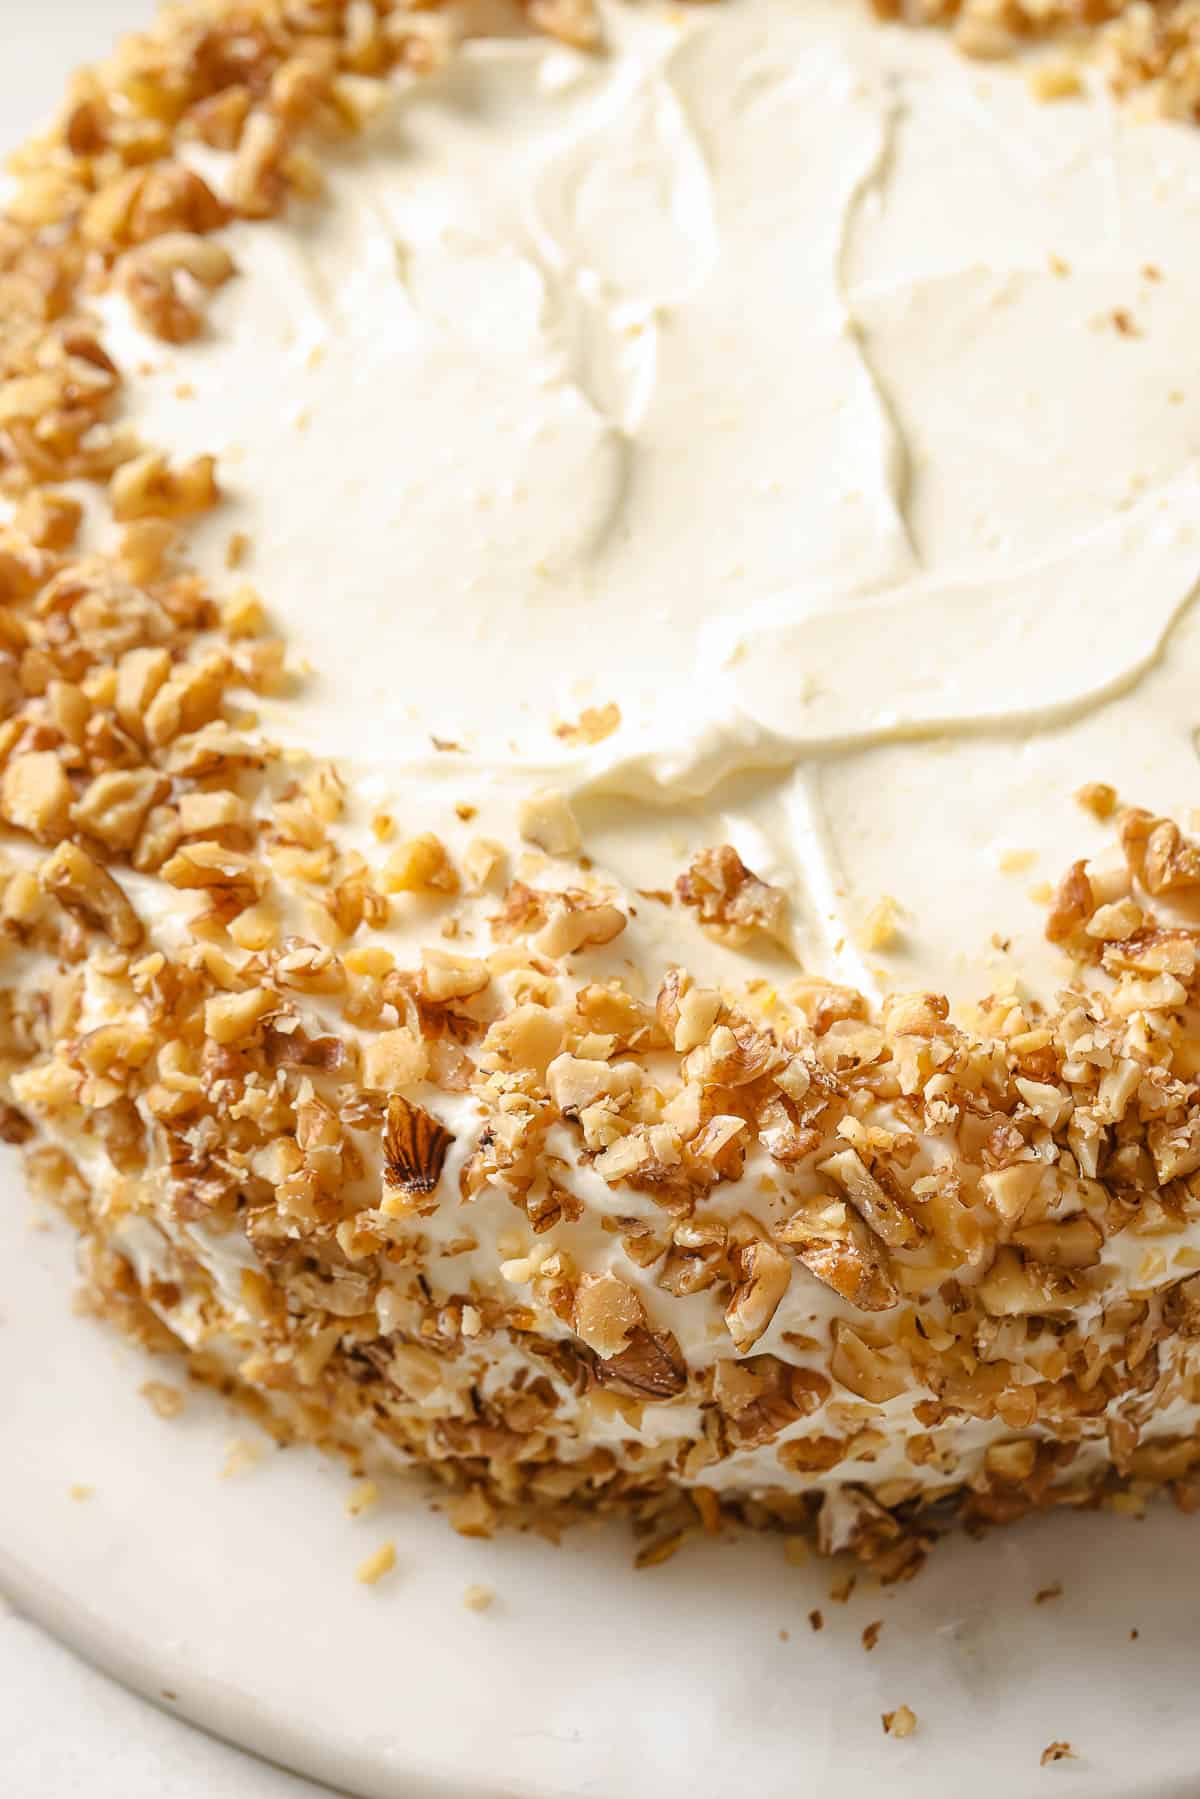 A slice of freshly baked and frosted double layer carrot cake with cream cheese frosting and toasted walnuts.